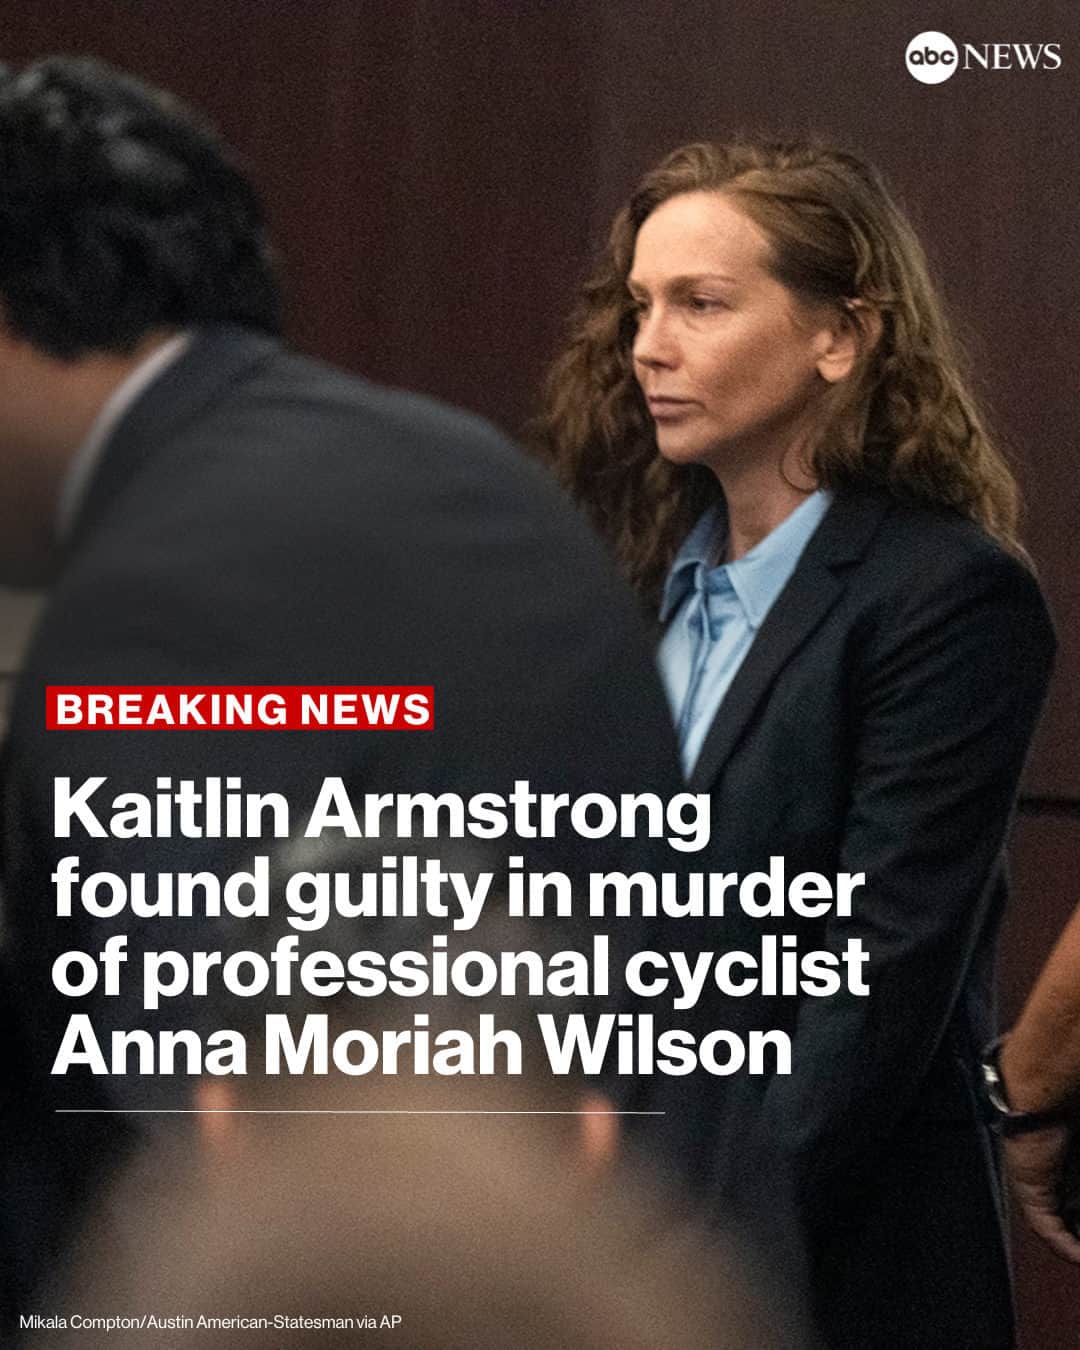 ABC Newsのインスタグラム：「A jury has found Texas yoga instructor Kaitlin Armstrong guilty of murder in the fatal shooting of romantic rival Anna Moriah "Mo" Wilson.  Wilson was found suffering from multiple gunshot wounds at a friend's home in Austin on the night of May 11, 2022. The cycling prodigy was once romantically linked to Armstrong's then-boyfriend, Colin Strickland, a fellow professional cyclist, and was found shot hours after meeting up with him, police said.  More at link in bio.」